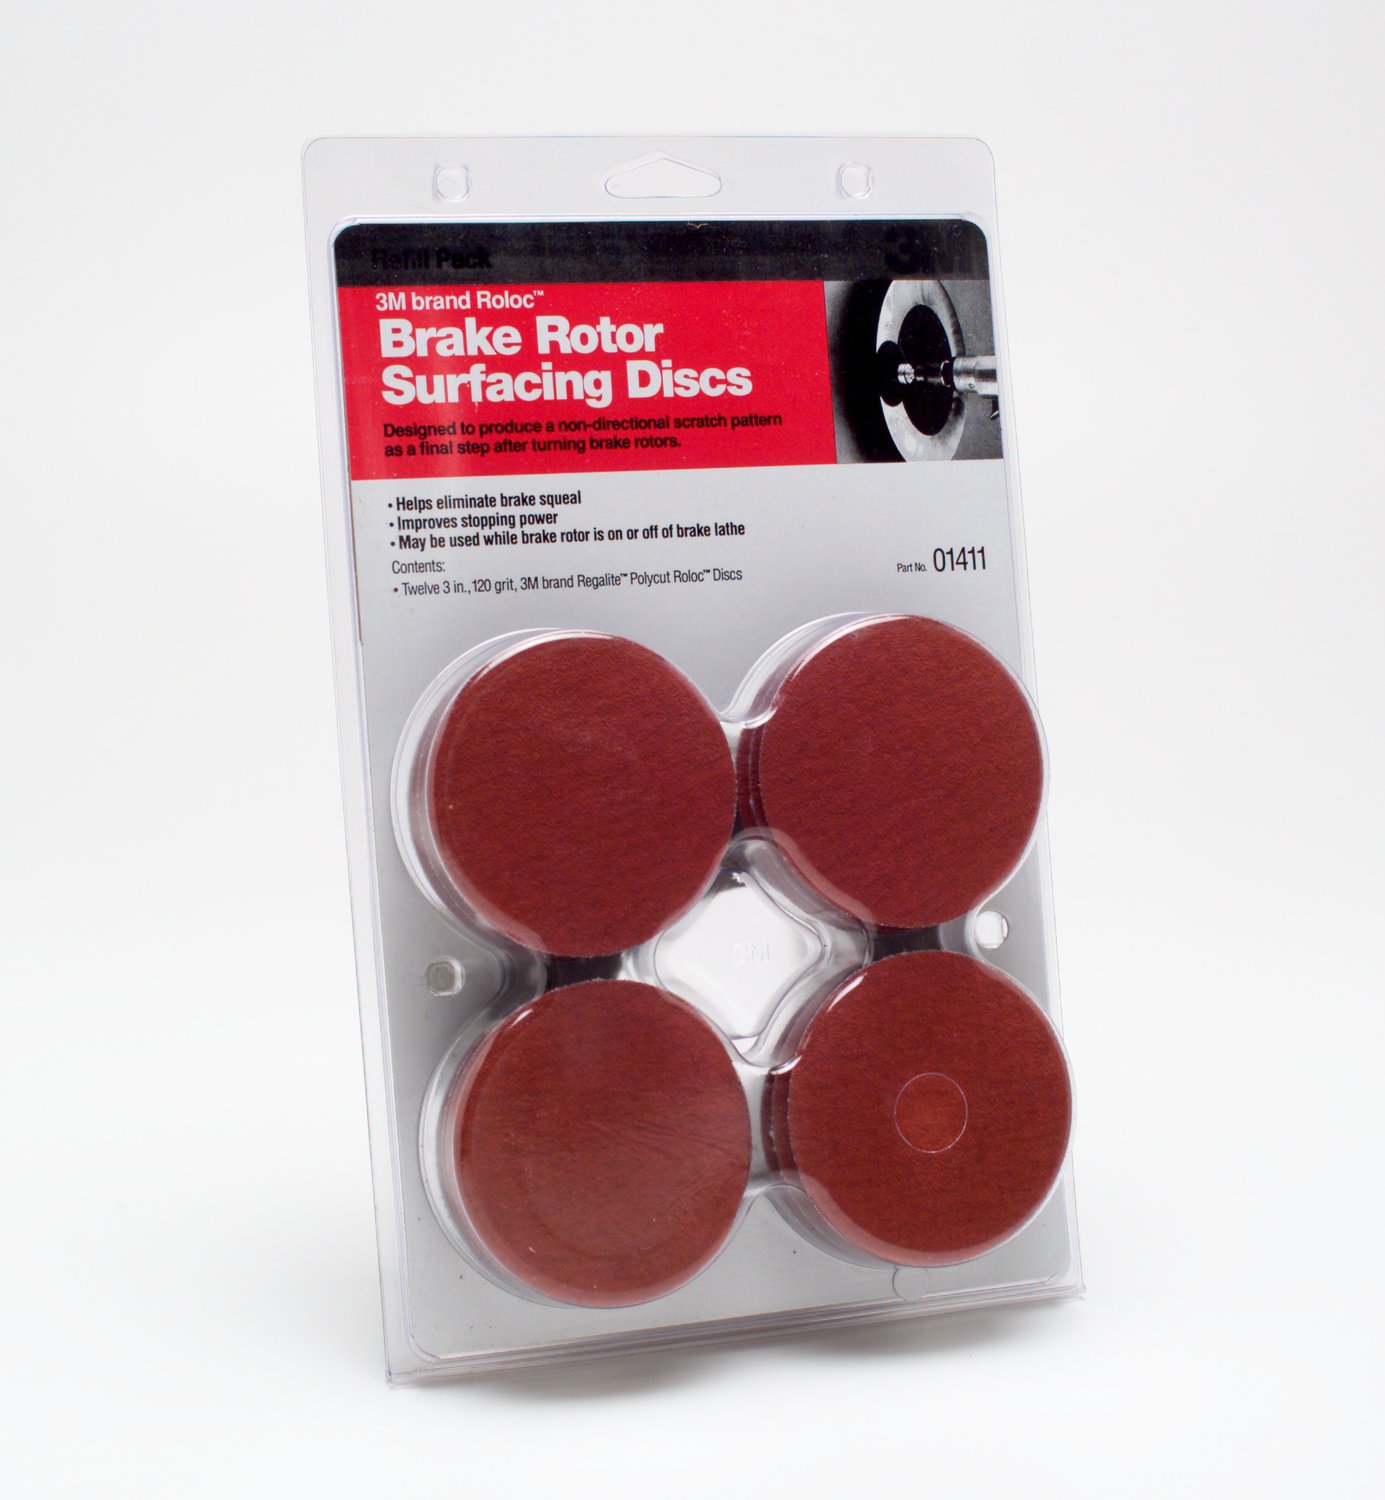 7000120356 - 3M Roloc Brake Rotor Surface Conditioning Disc Refill Pack, 01411,
P120 grit, 12 discs pack, 12 packs per case